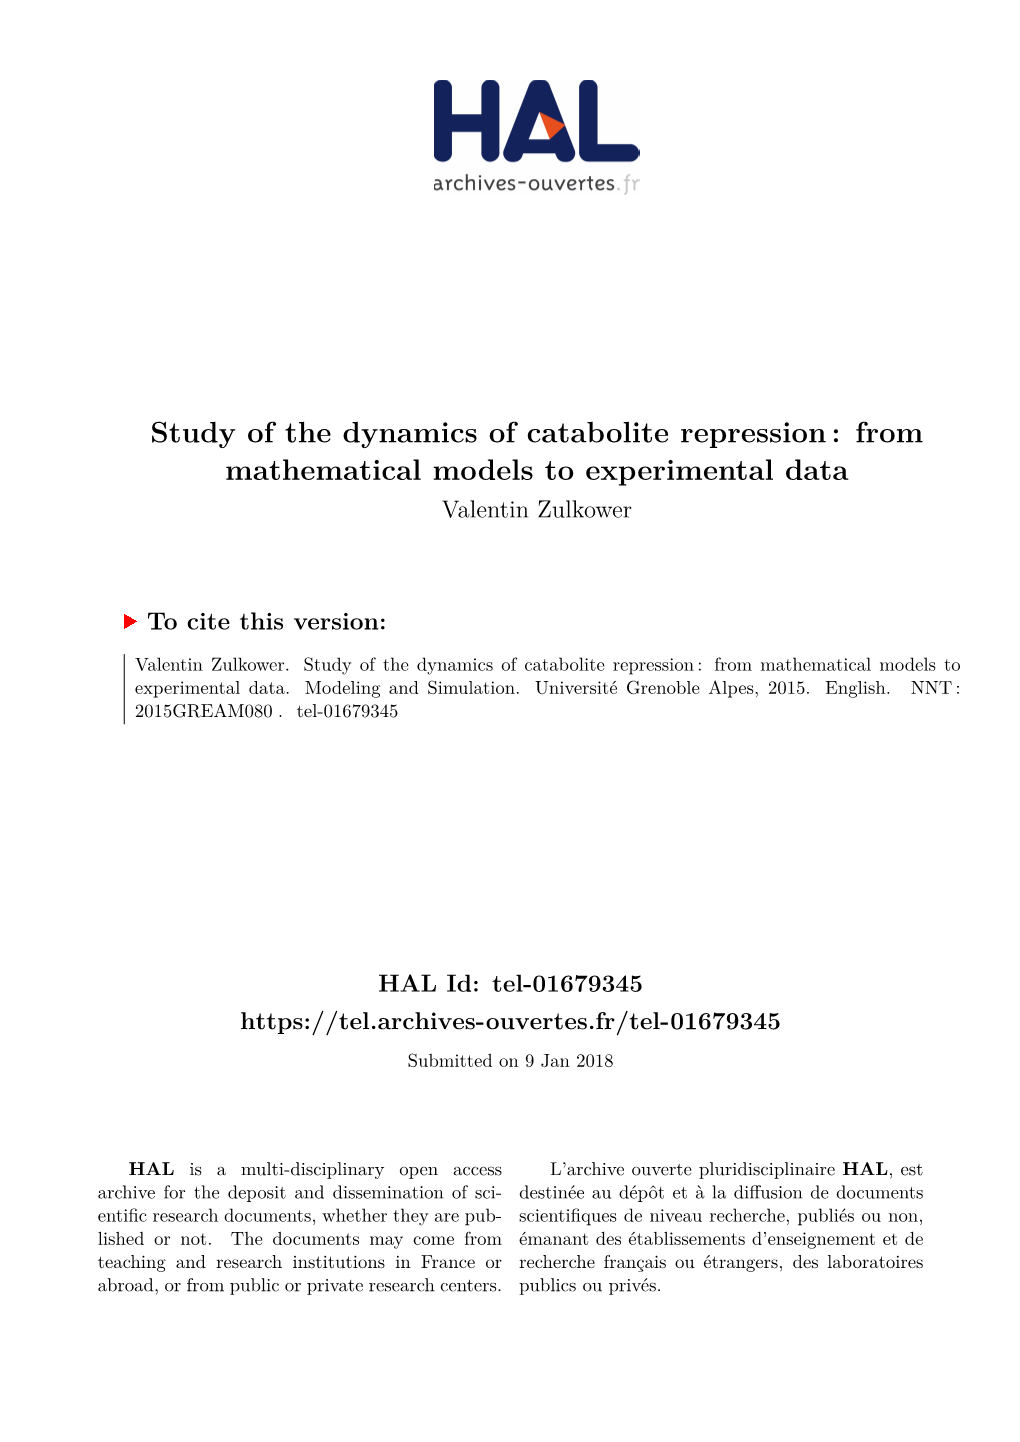 Study of the Dynamics of Catabolite Repression : from Mathematical Models to Experimental Data Valentin Zulkower